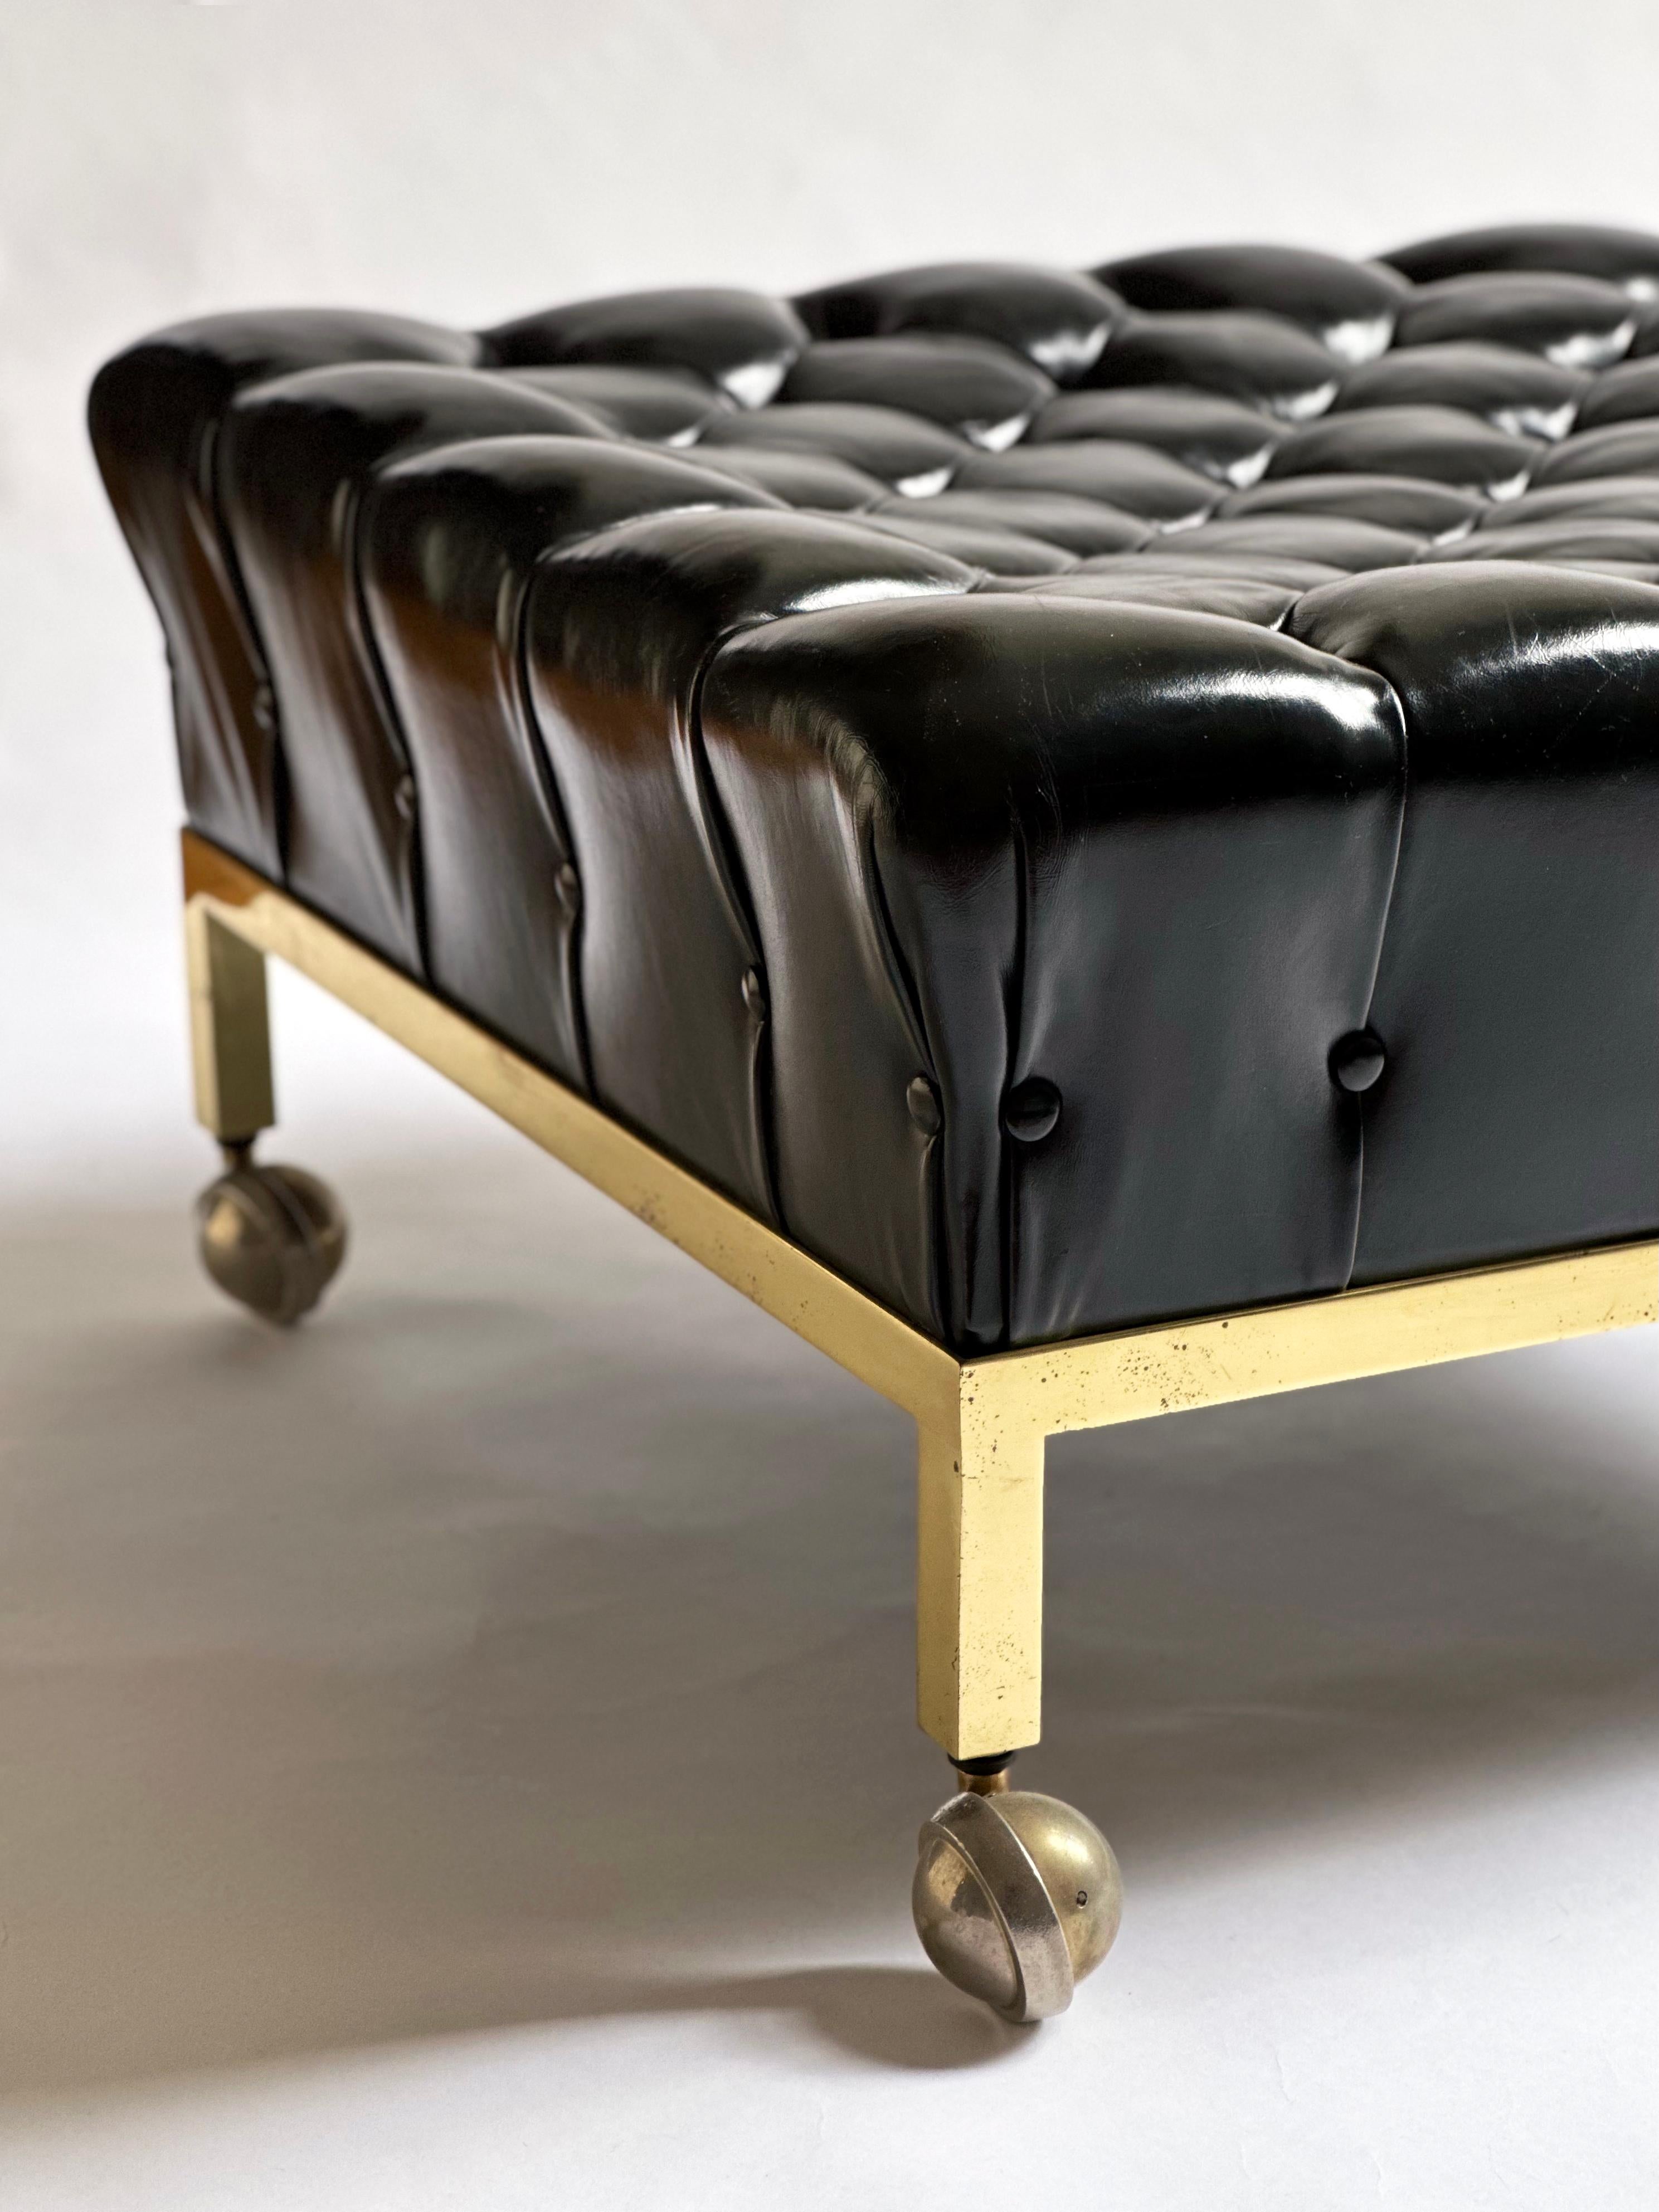 Lacquered Brass Framed Biscuit Tufted Ottoman in Original Black Leather by Harvey Probber For Sale